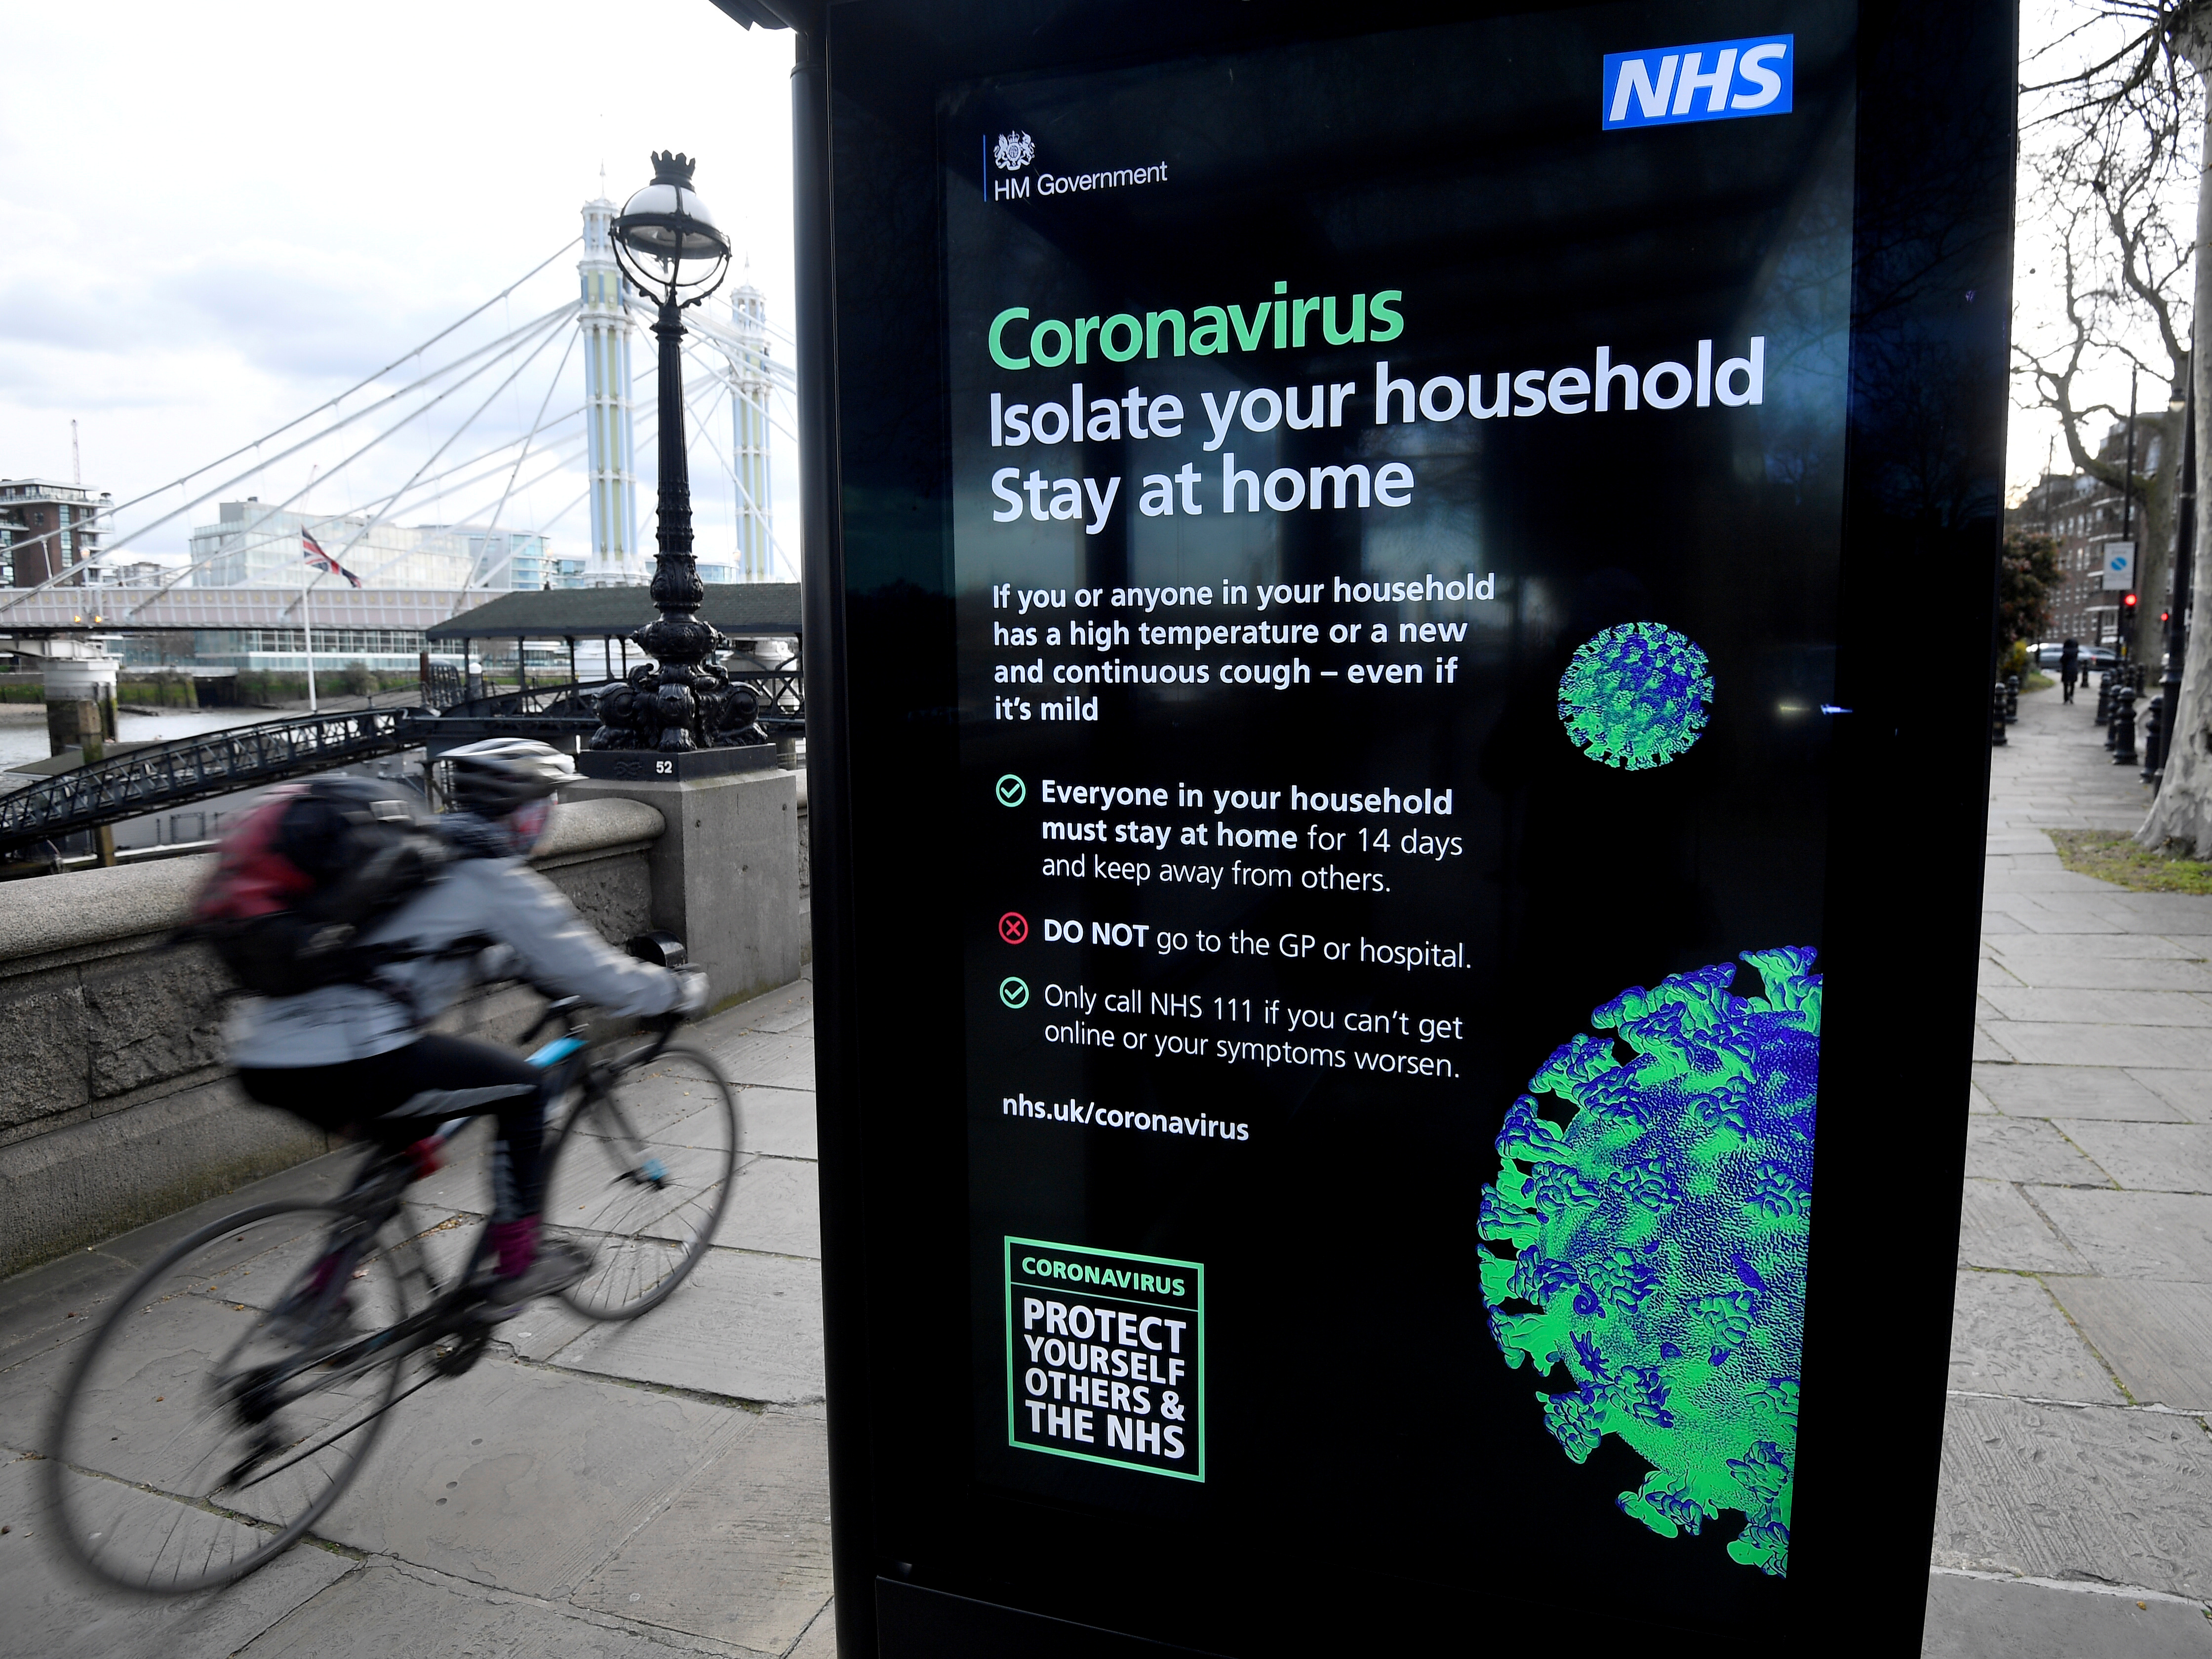 &copy; Reuters. FILE PHOTO: A cyclist rides past a UK government public health campaign poster as the spread of the coronavirus disease (COVID-19) continues, in London